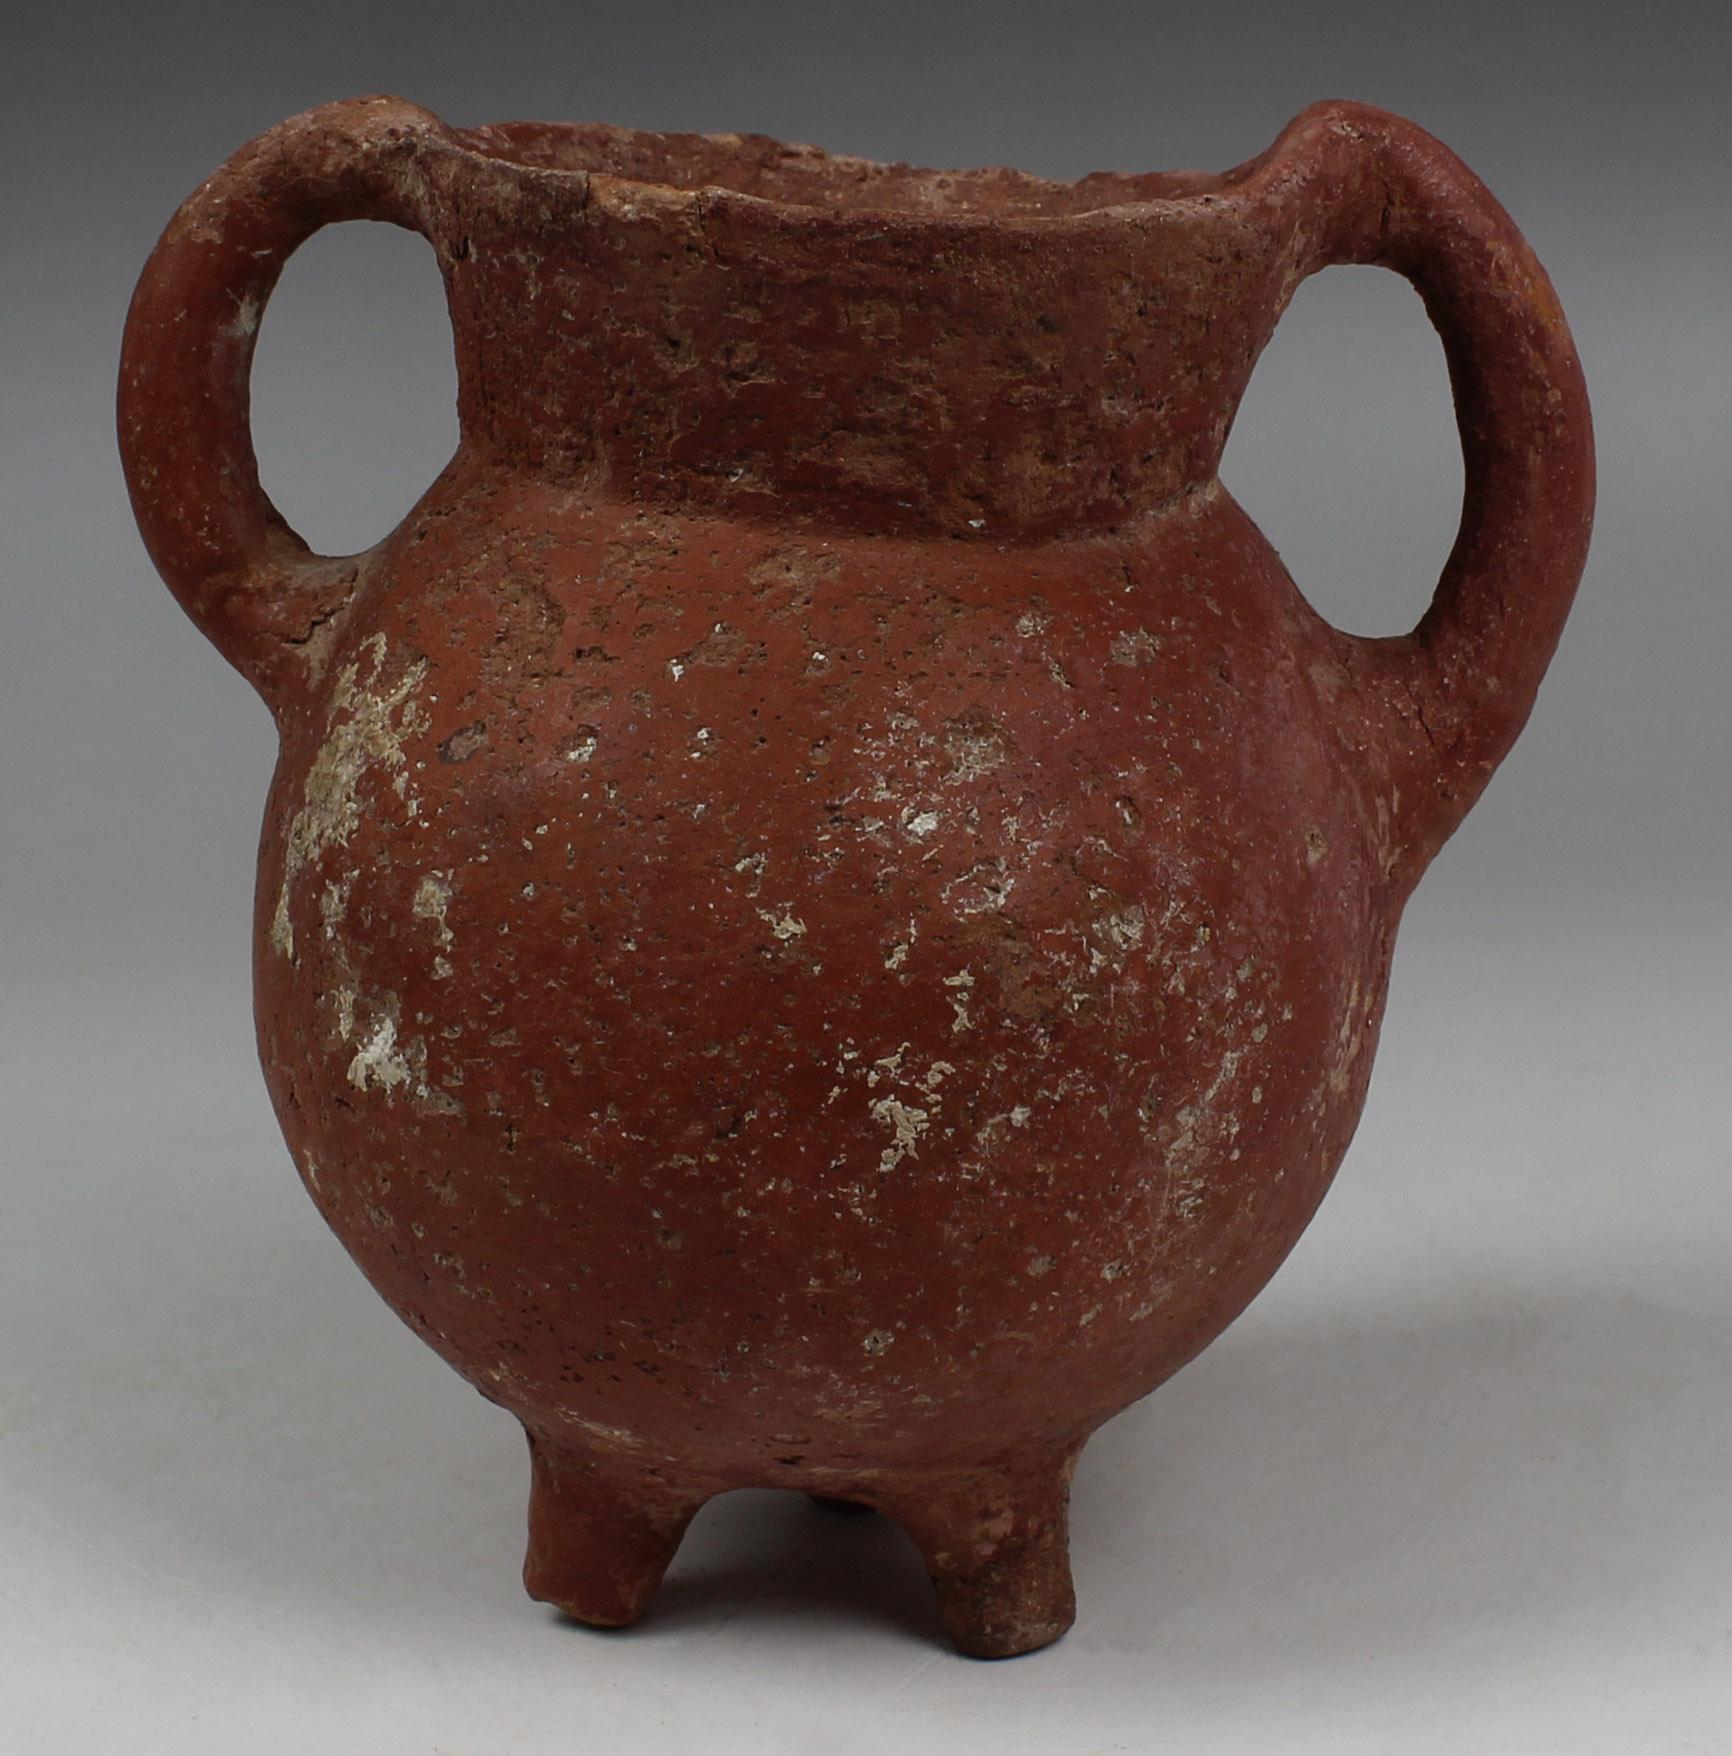 ITEM: Tripod cooking pot
MATERIAL: Pottery
CULTURE: Bronze Age, Cypriot
PERIOD: 1900 – 1800 B.C
DIMENSIONS: 130 mm x 128 mm
CONDITION: Good condition
PROVENANCE: Ex Emeritus collection (USA), collected from the 1950’s to the 1980’s by a